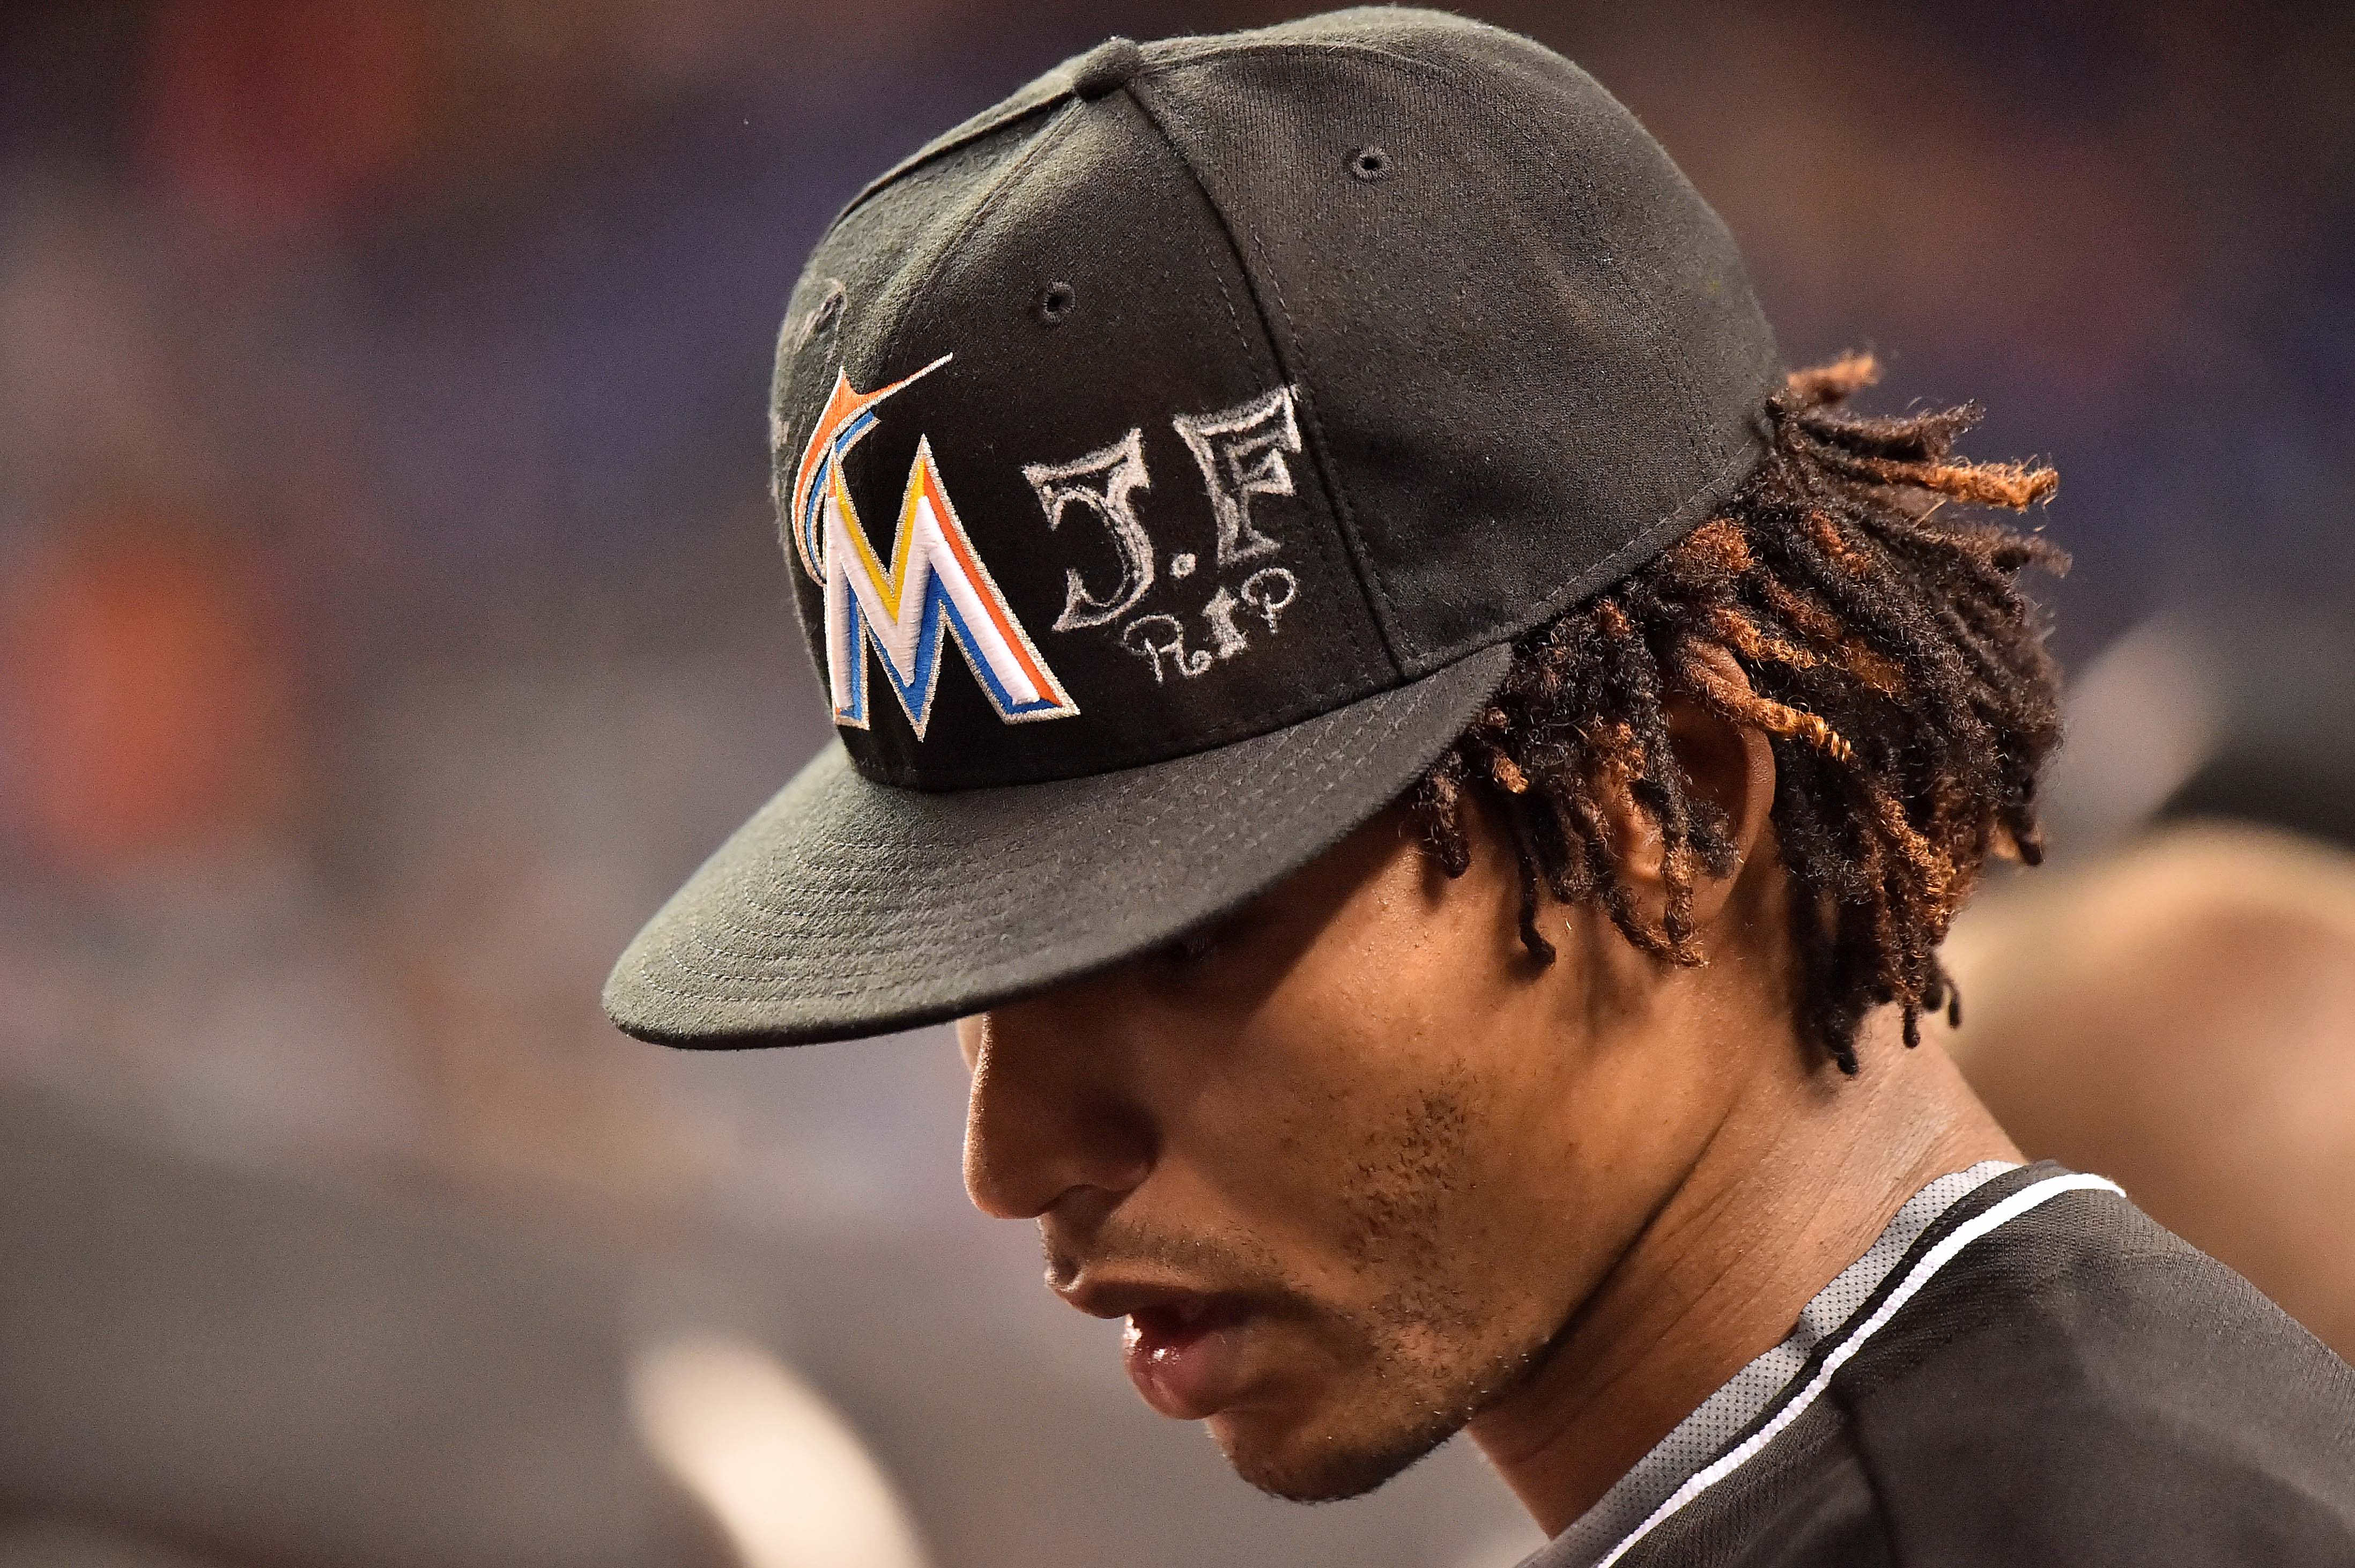 Sep 26, 2016; Miami, FL, USA; Miami Marlins relief pitcher Jose Urena wears a hat with a memorial for teammate starting pitcher Jose Fernandez in the game against the New York Mets at Marlins Park. Mandatory Credit: Jasen Vinlove-USA TODAY Sports ORG XMIT: USATSI-262928 ORIG FILE ID: 20160926_jfv_bv1_047.jpg